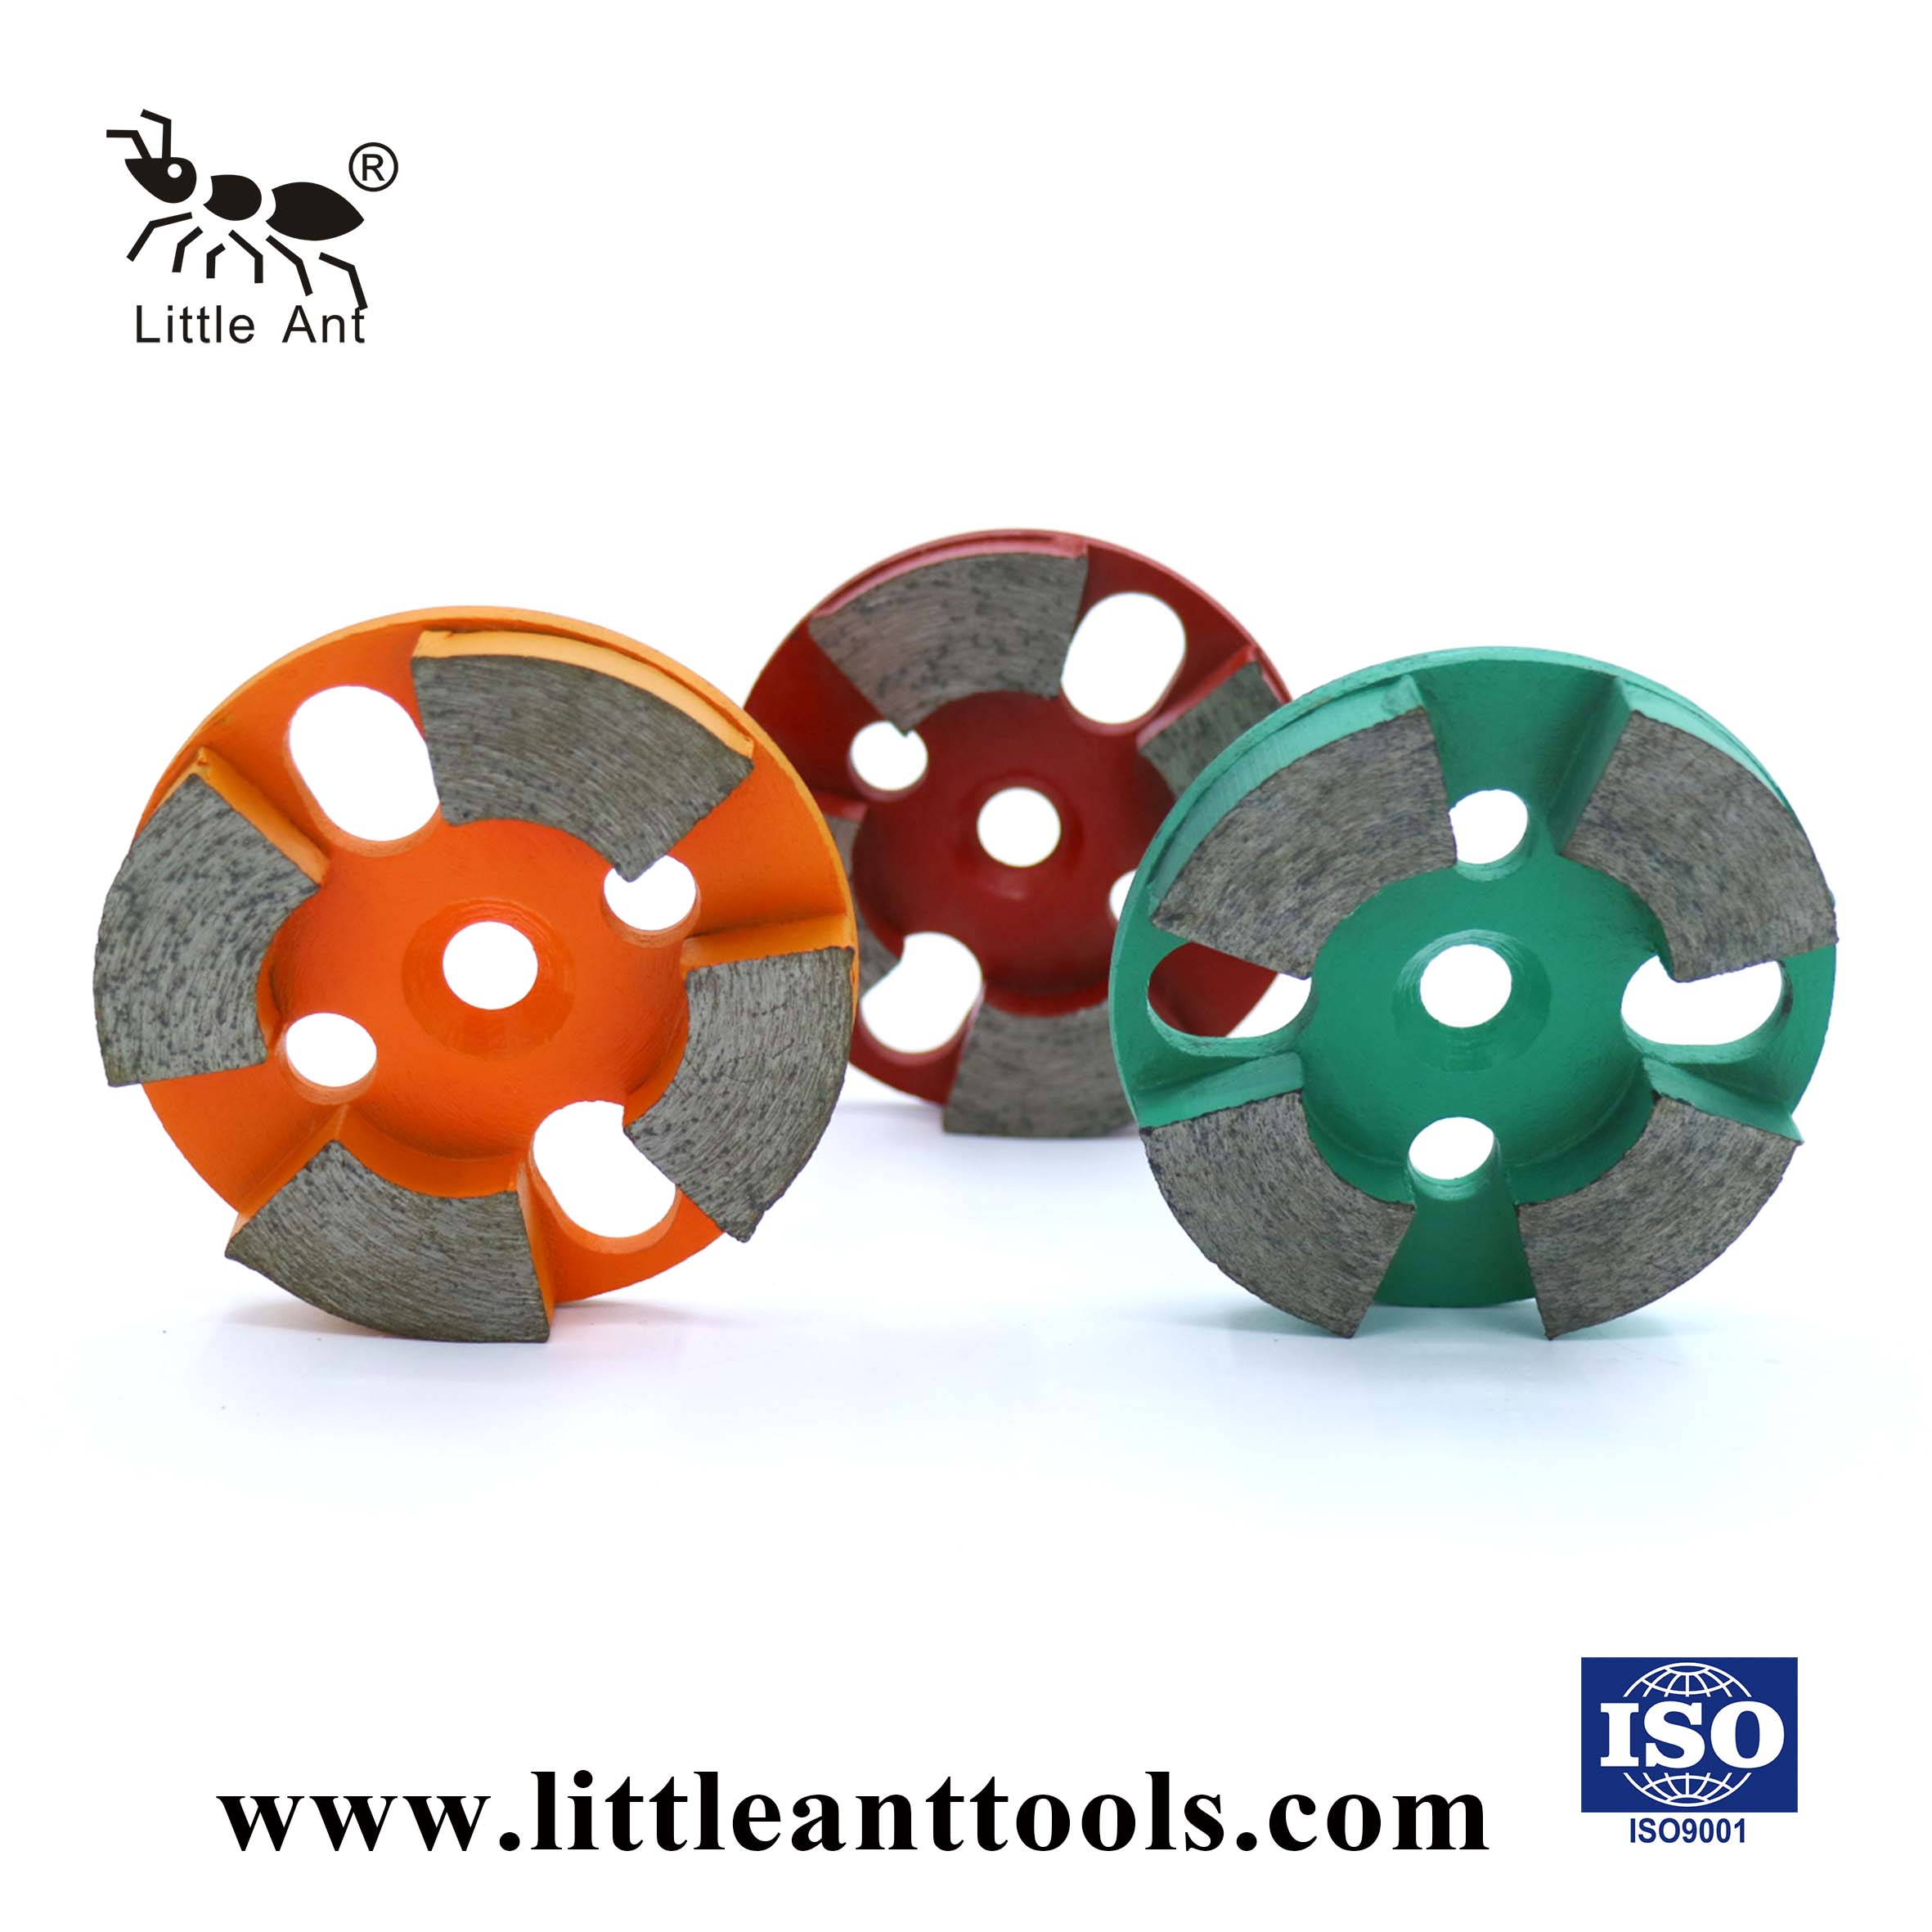 LITTLE ANT Circular Metal Grinding Plate for Concrete Sector Segemnt Dry And Wet Use Coarse